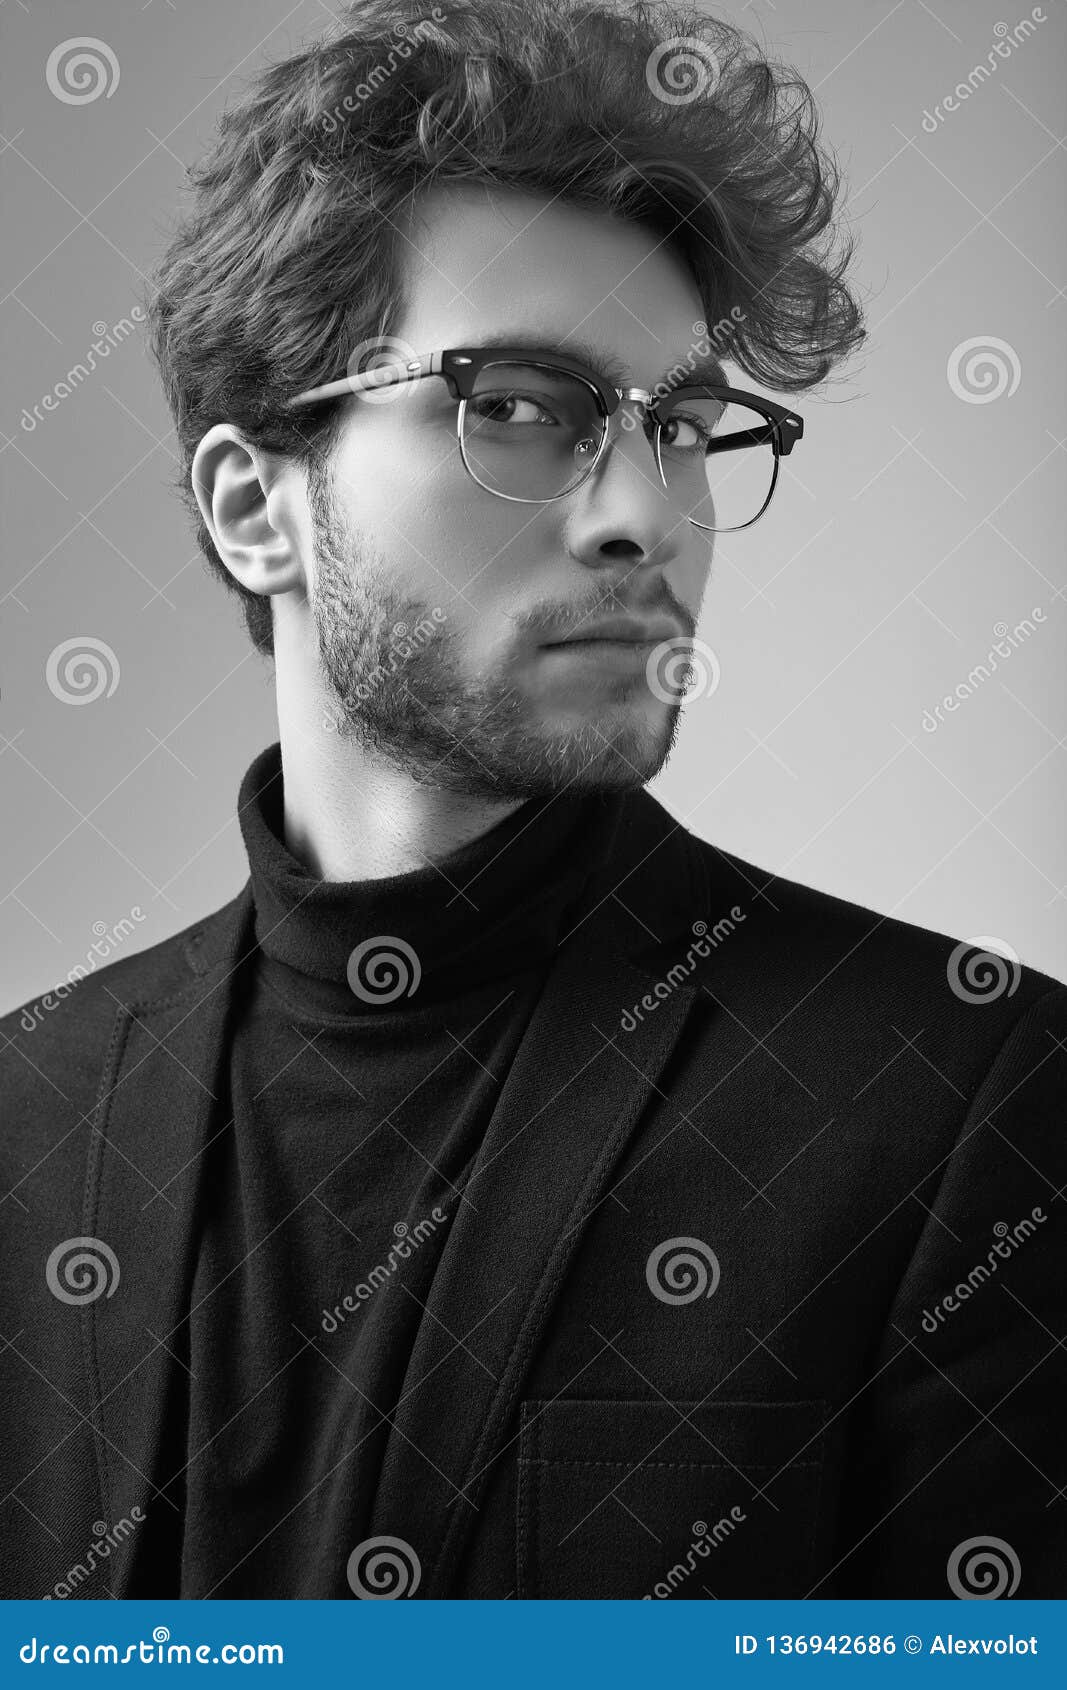 Details about   Vintage Black and White Photo Young Man Curly Hair Suit Tie Glasses 2.5 x 3.5 